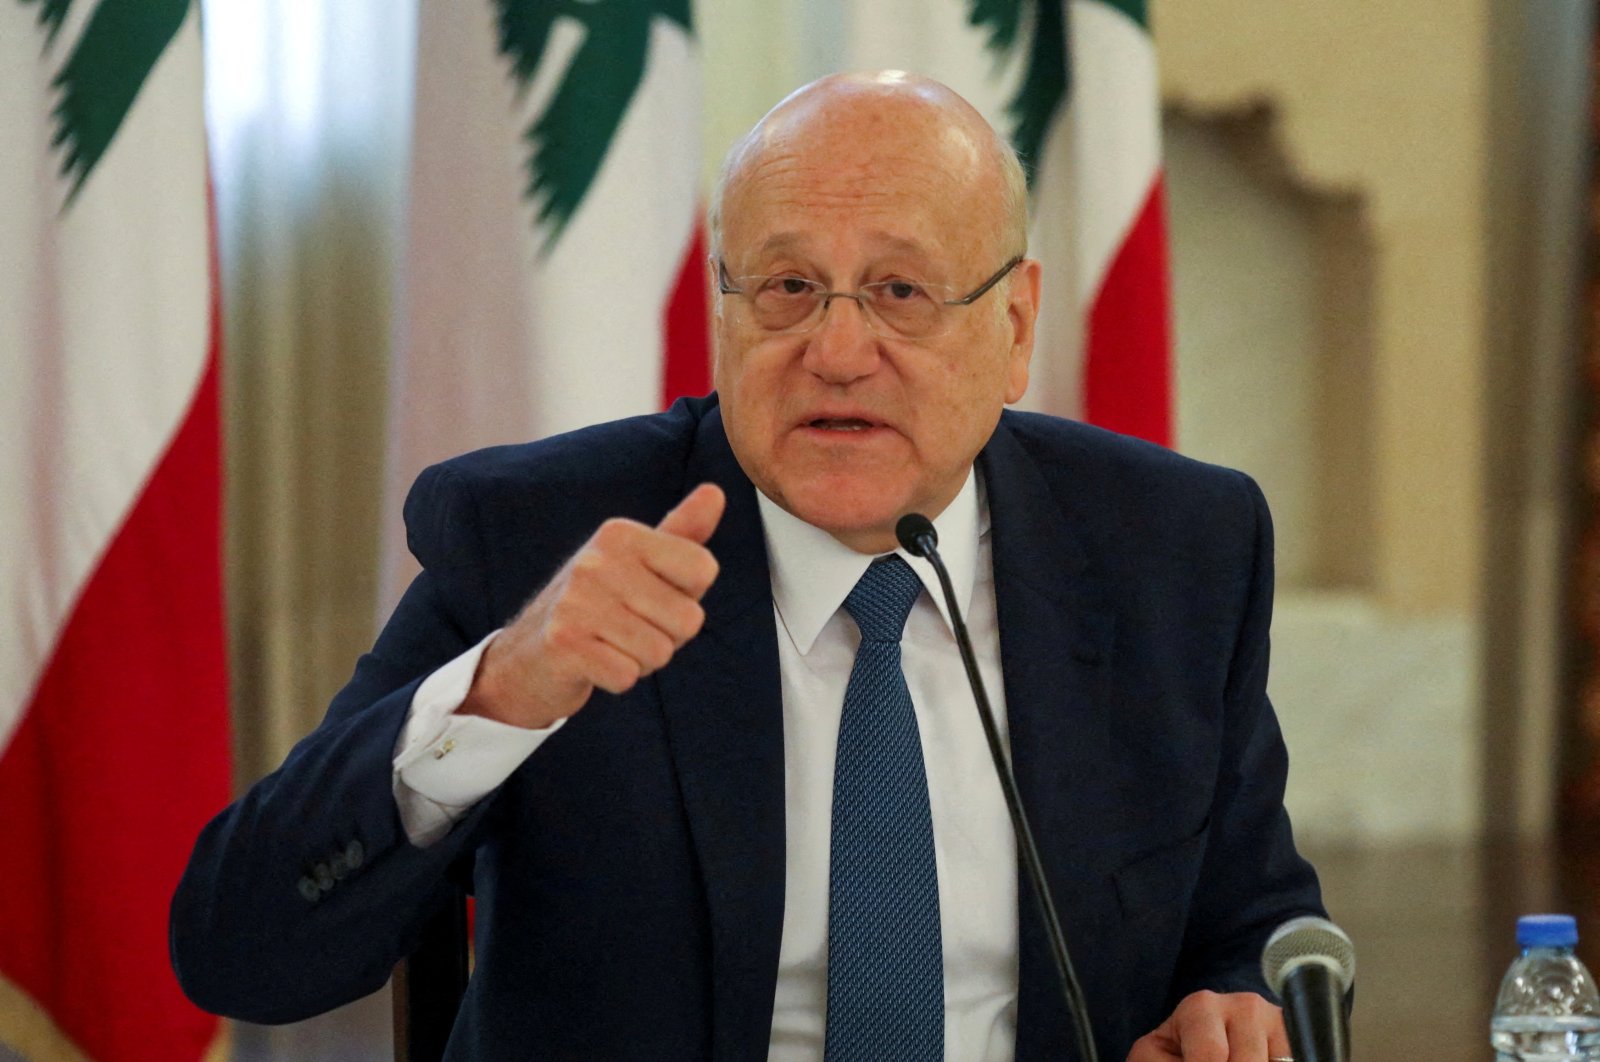 Lebanese Prime Minister Najib Mikati during a news conference on the latest developments in the country at the government palace in Beirut, Lebanon, Dec. 28, 2021. (REUTERS Photo)